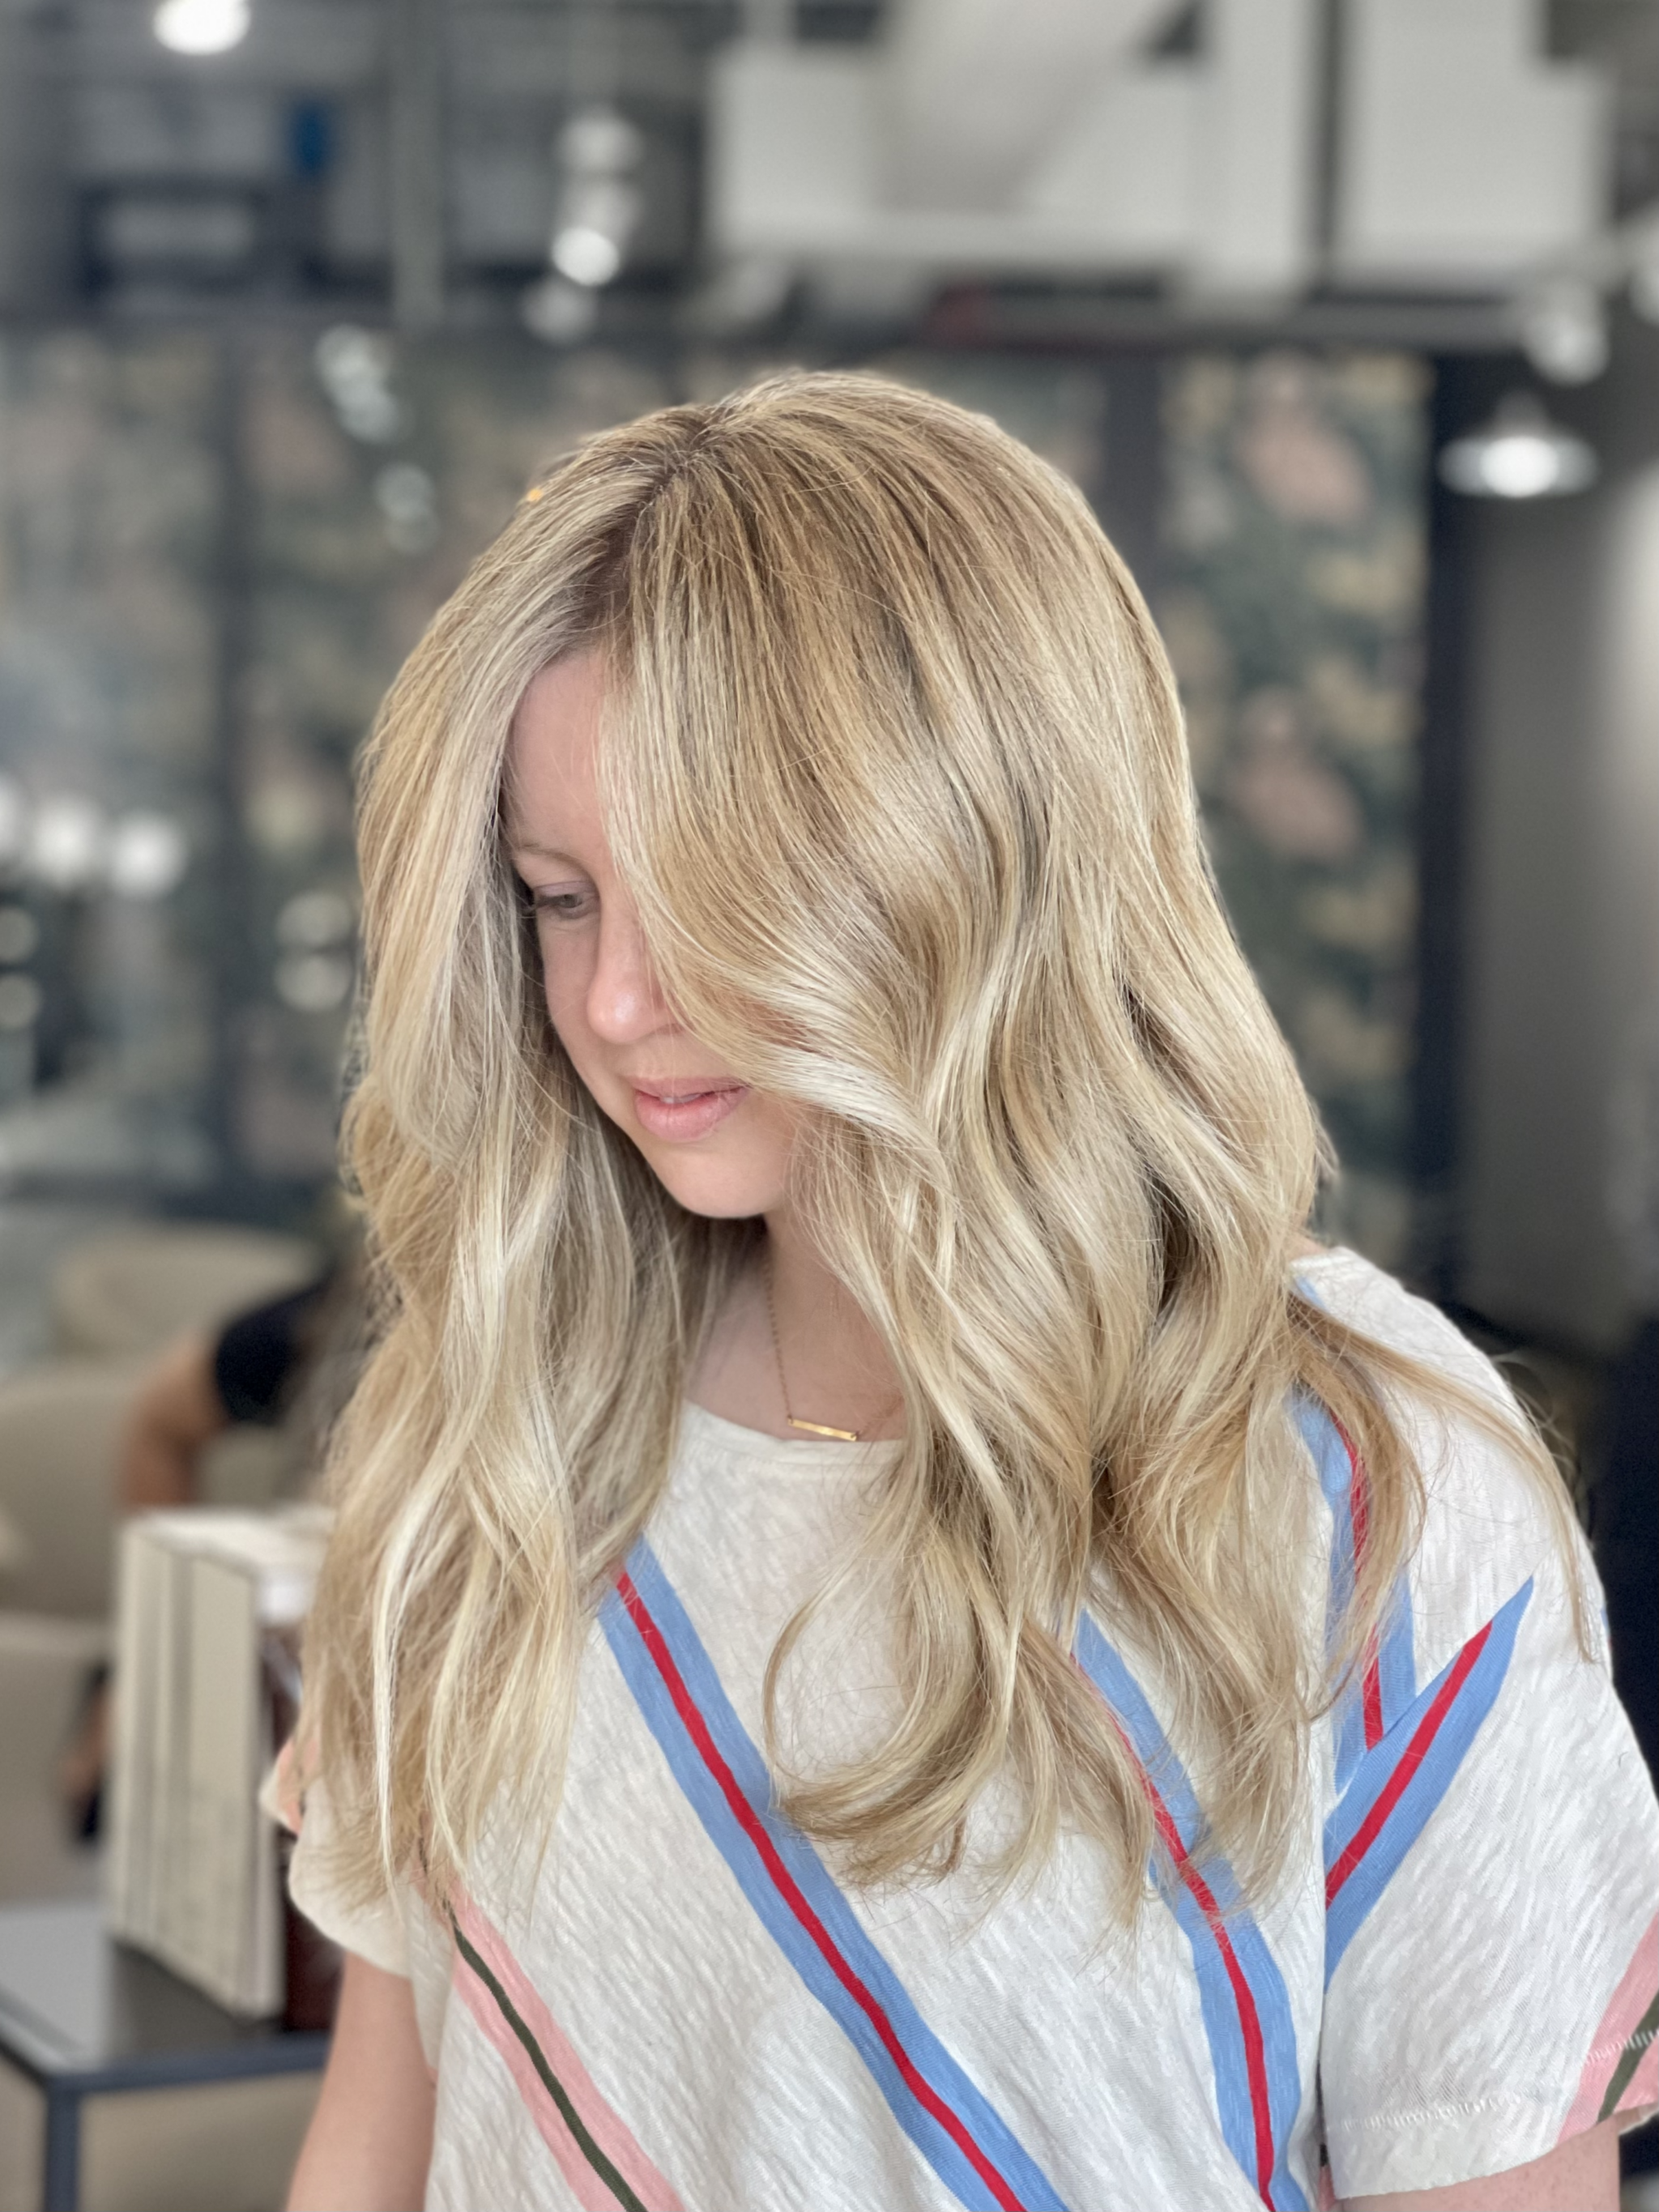 Balayage vs. Highlights: Which is best for you?